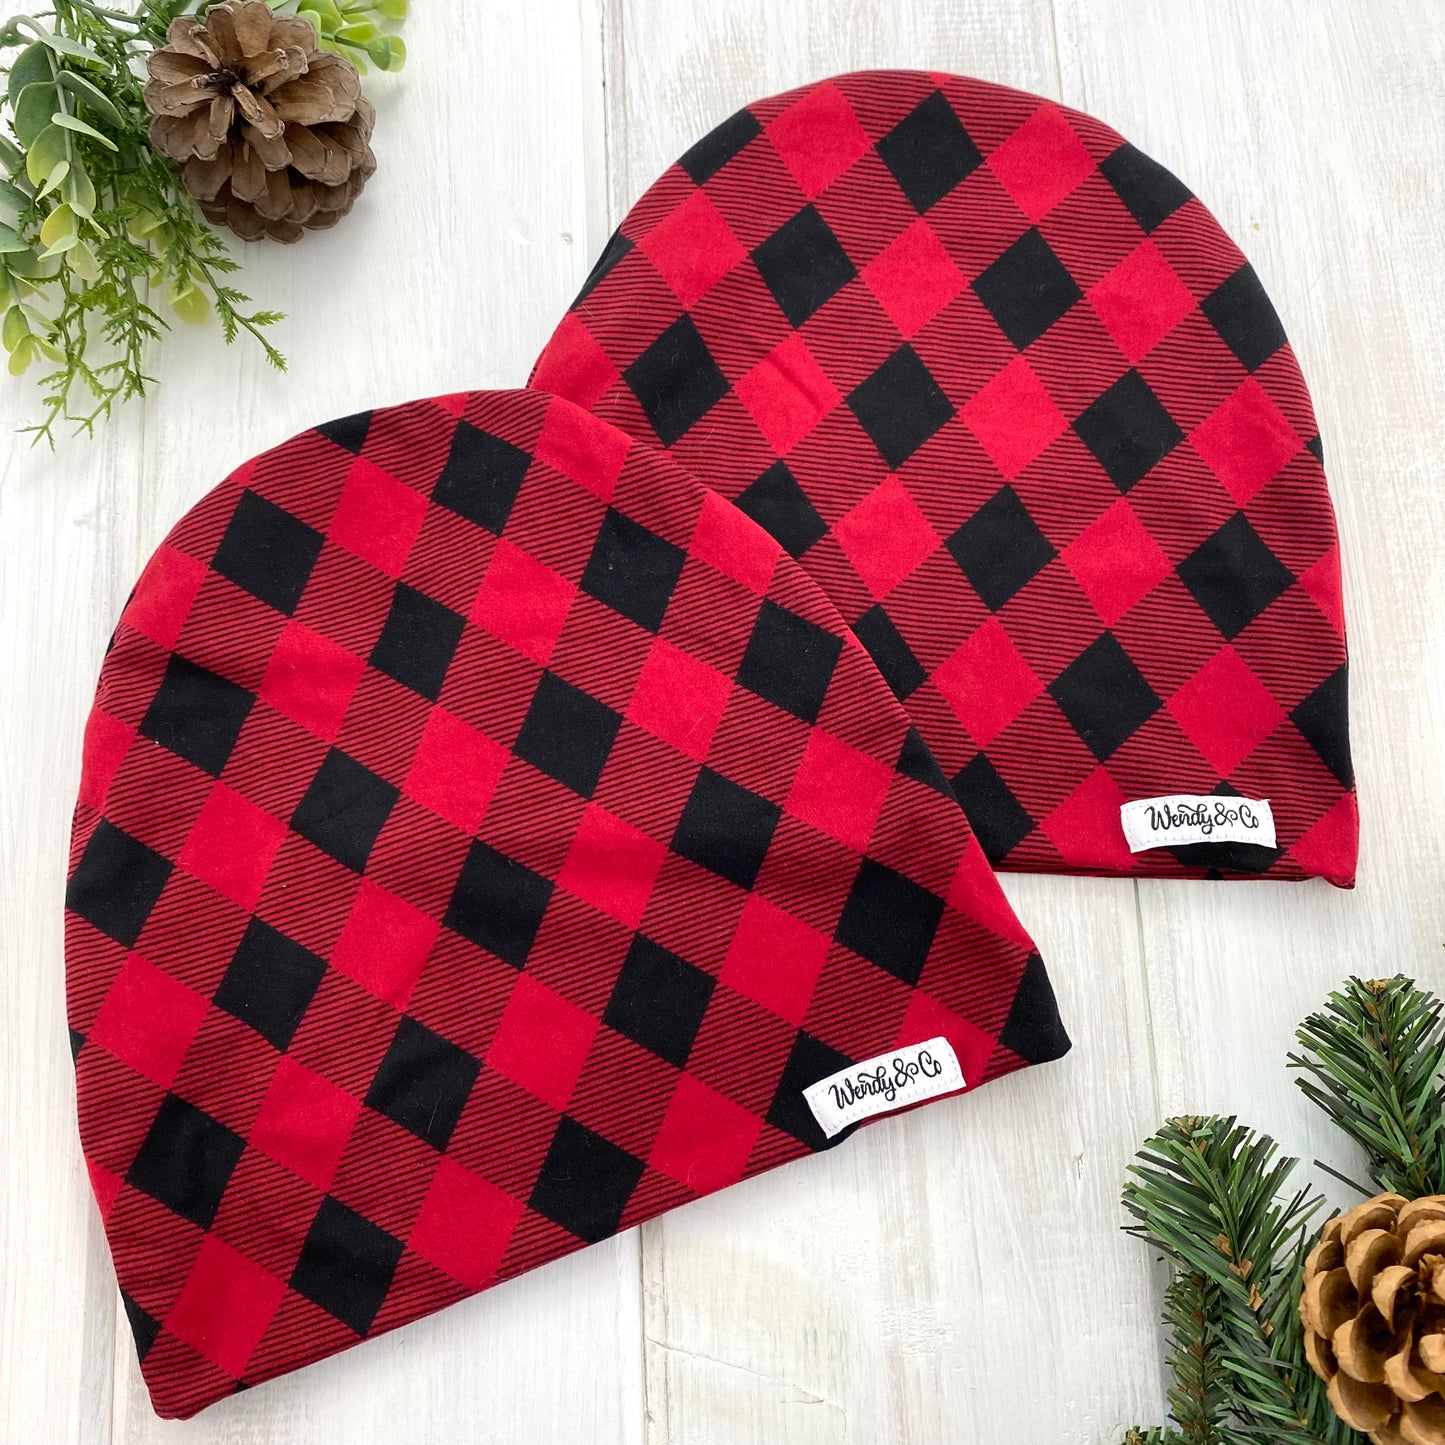 Modern fit slouchy beanie in red and black plaid.